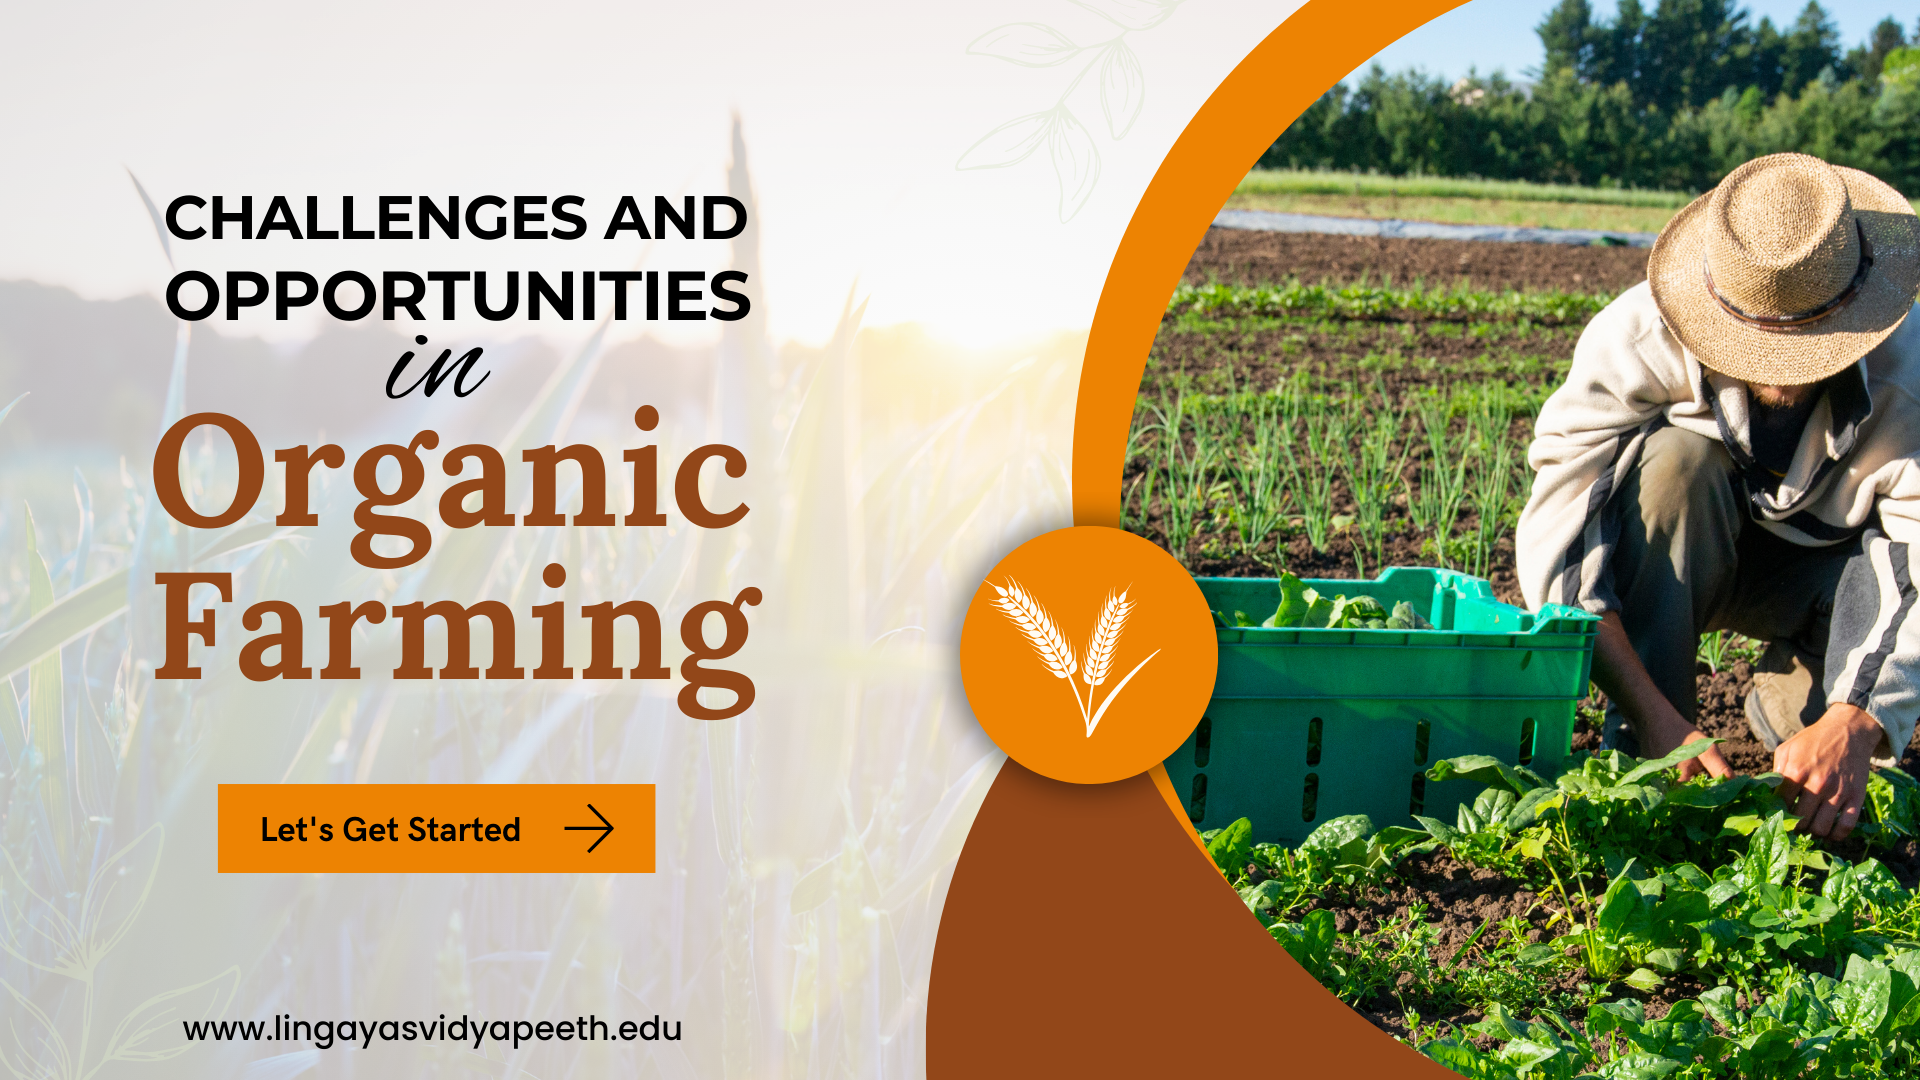 What are the Challenges and Opportunities in Organic Farming?